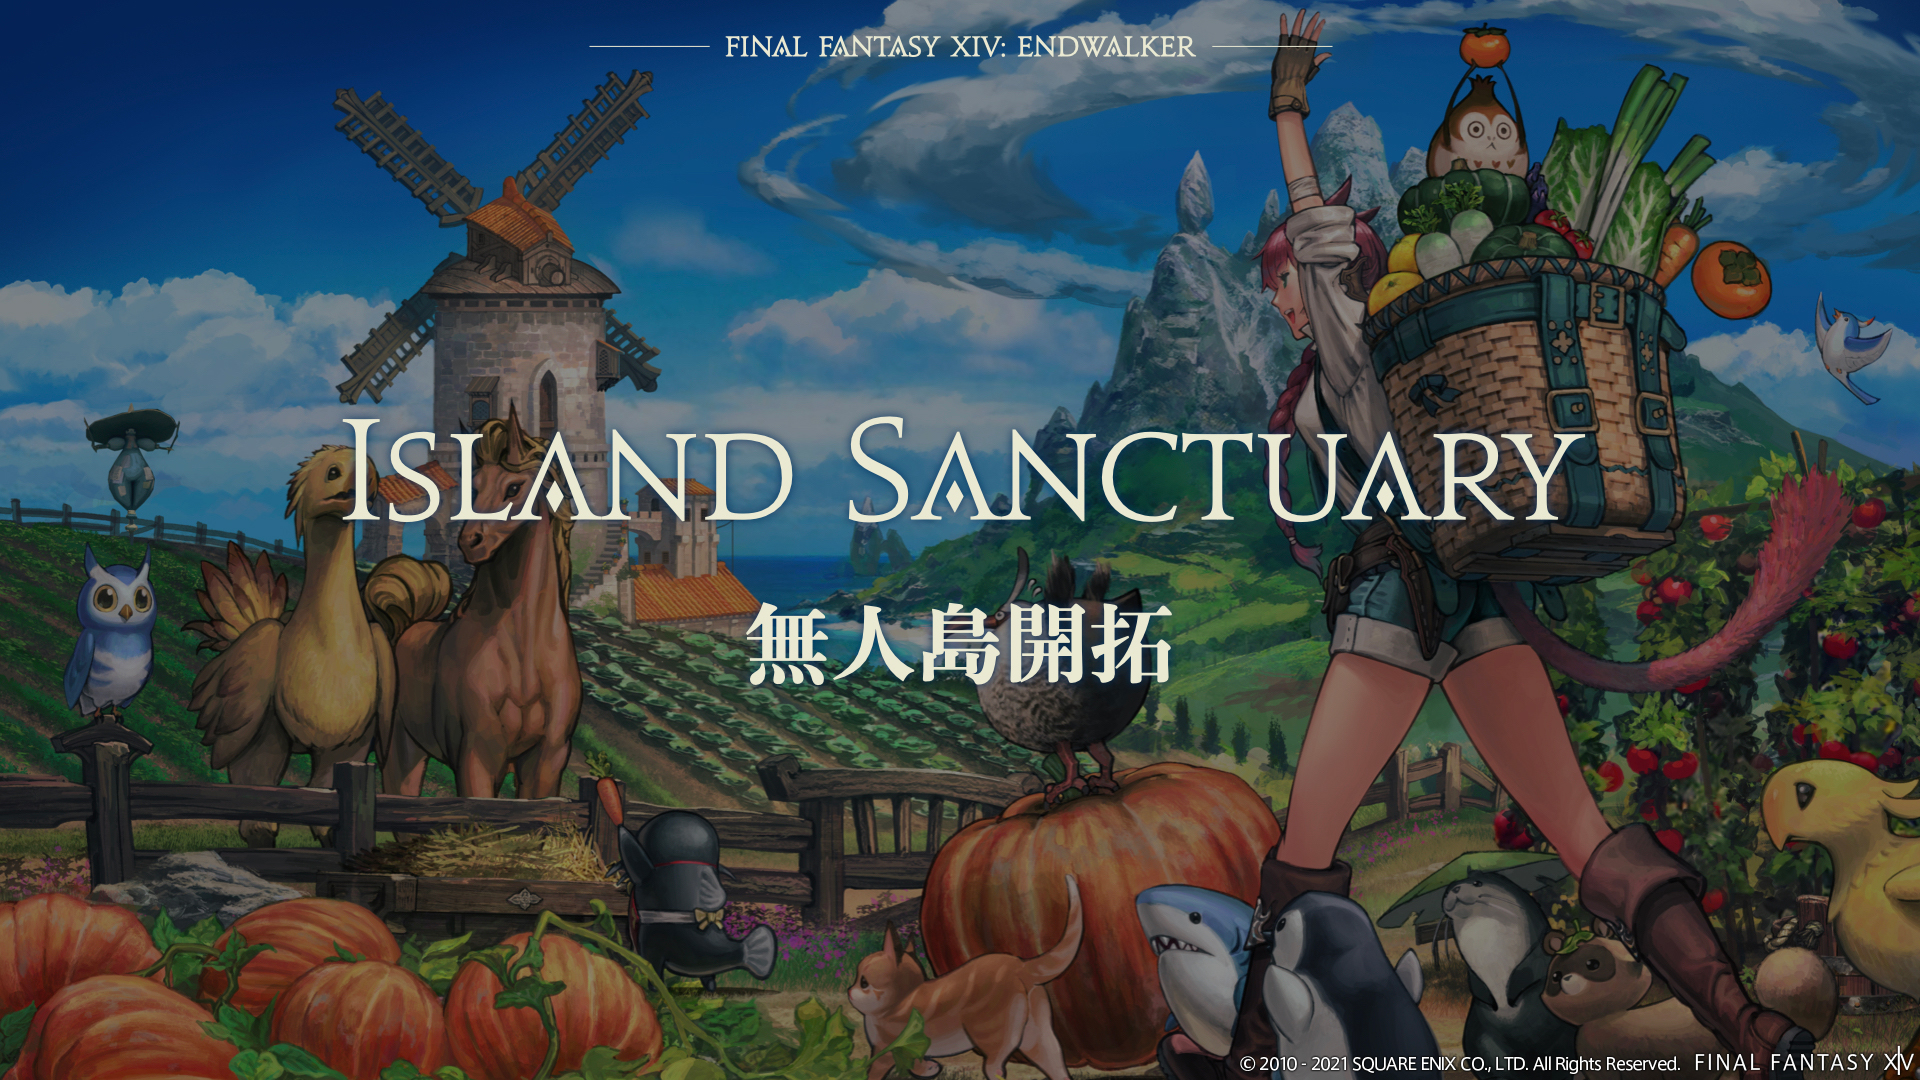 Island Sanctuary in FFXIV - What We Know So Far 2